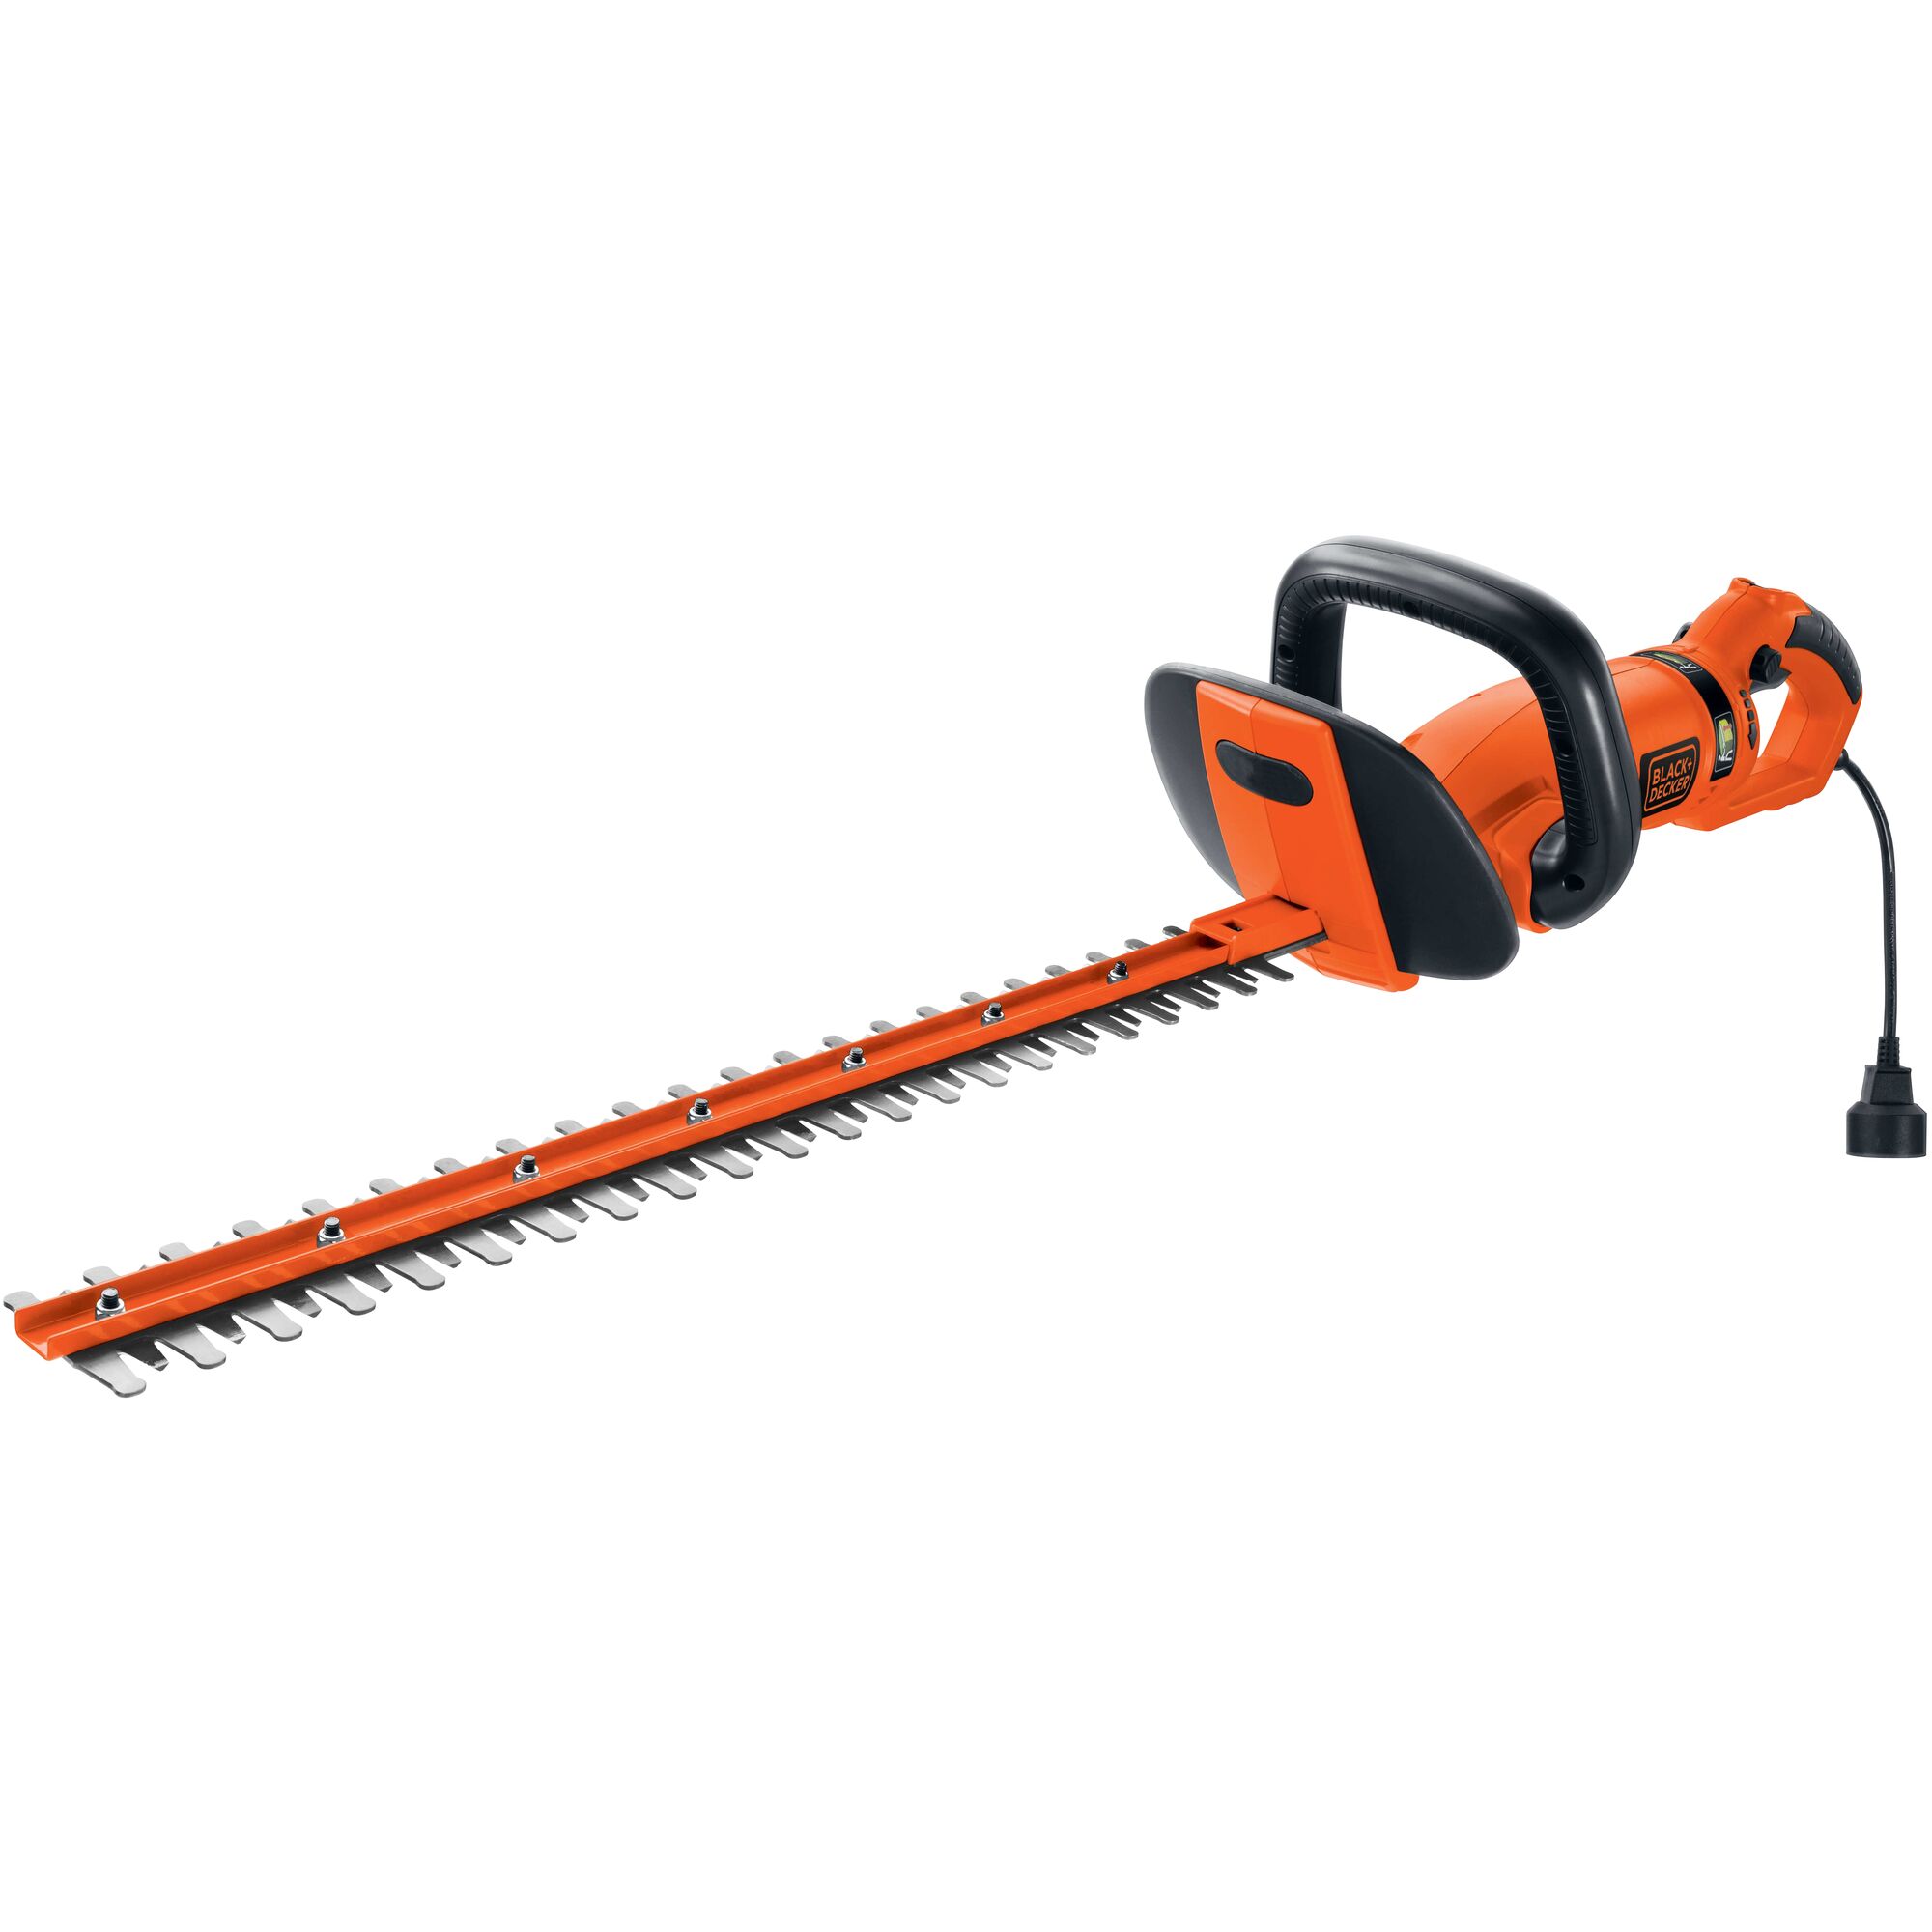 Hedge trimmer with rotating handle.